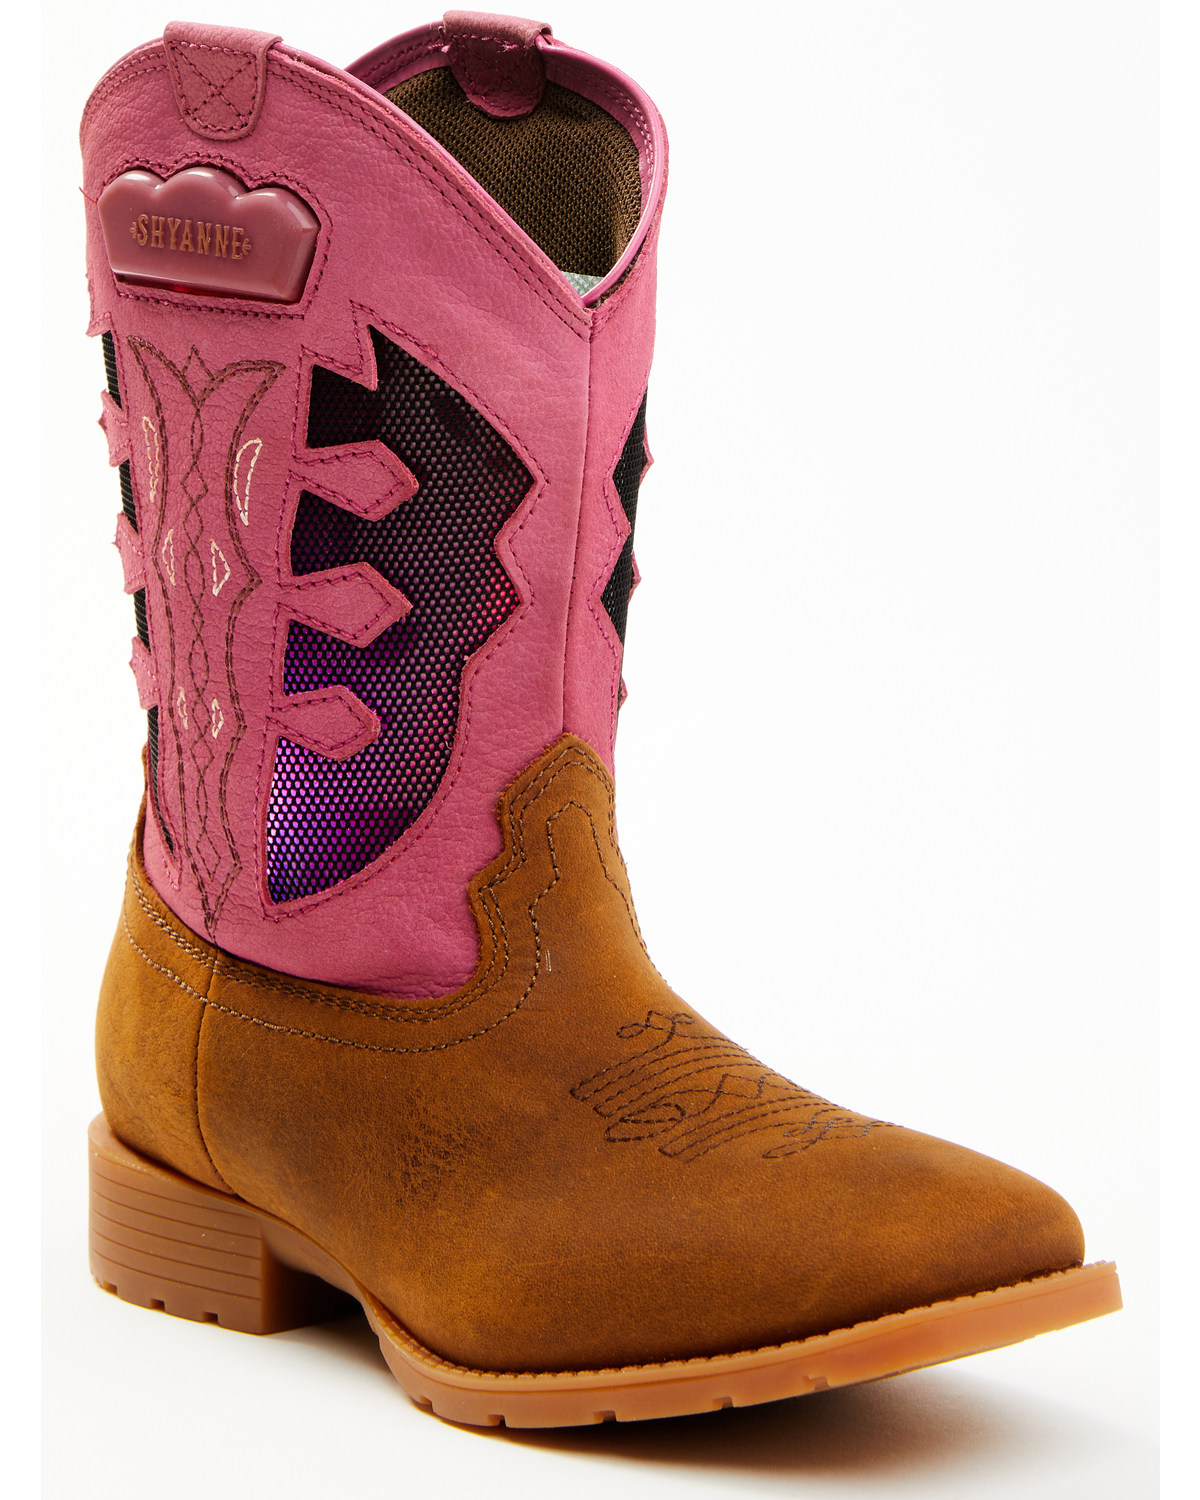 Shyanne Girls' Light-Up Western Boots - Round Toe